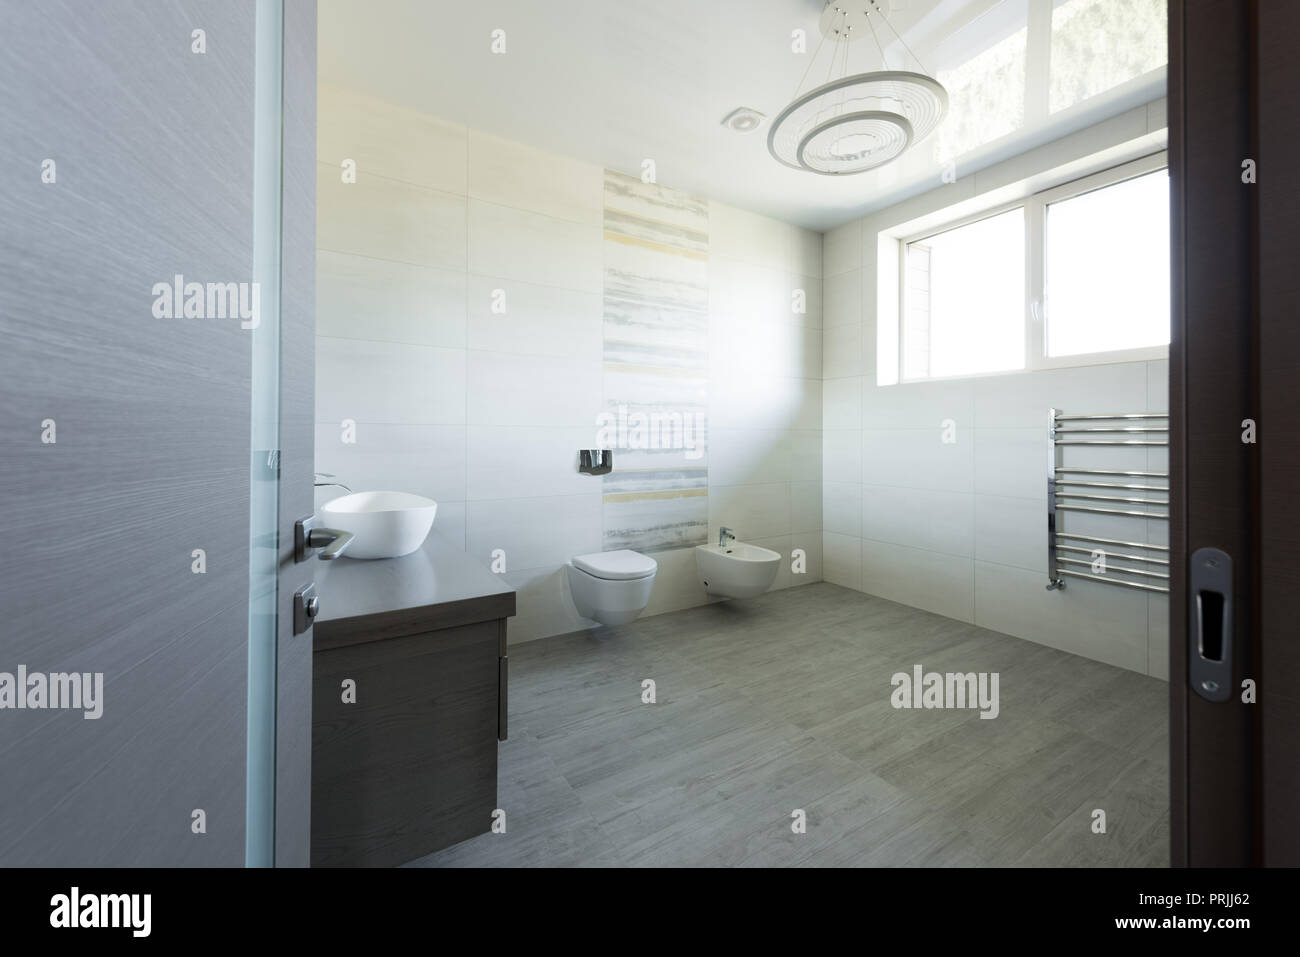 interior of modern grey bathroom with toilet and bidet, view from door Stock Photo